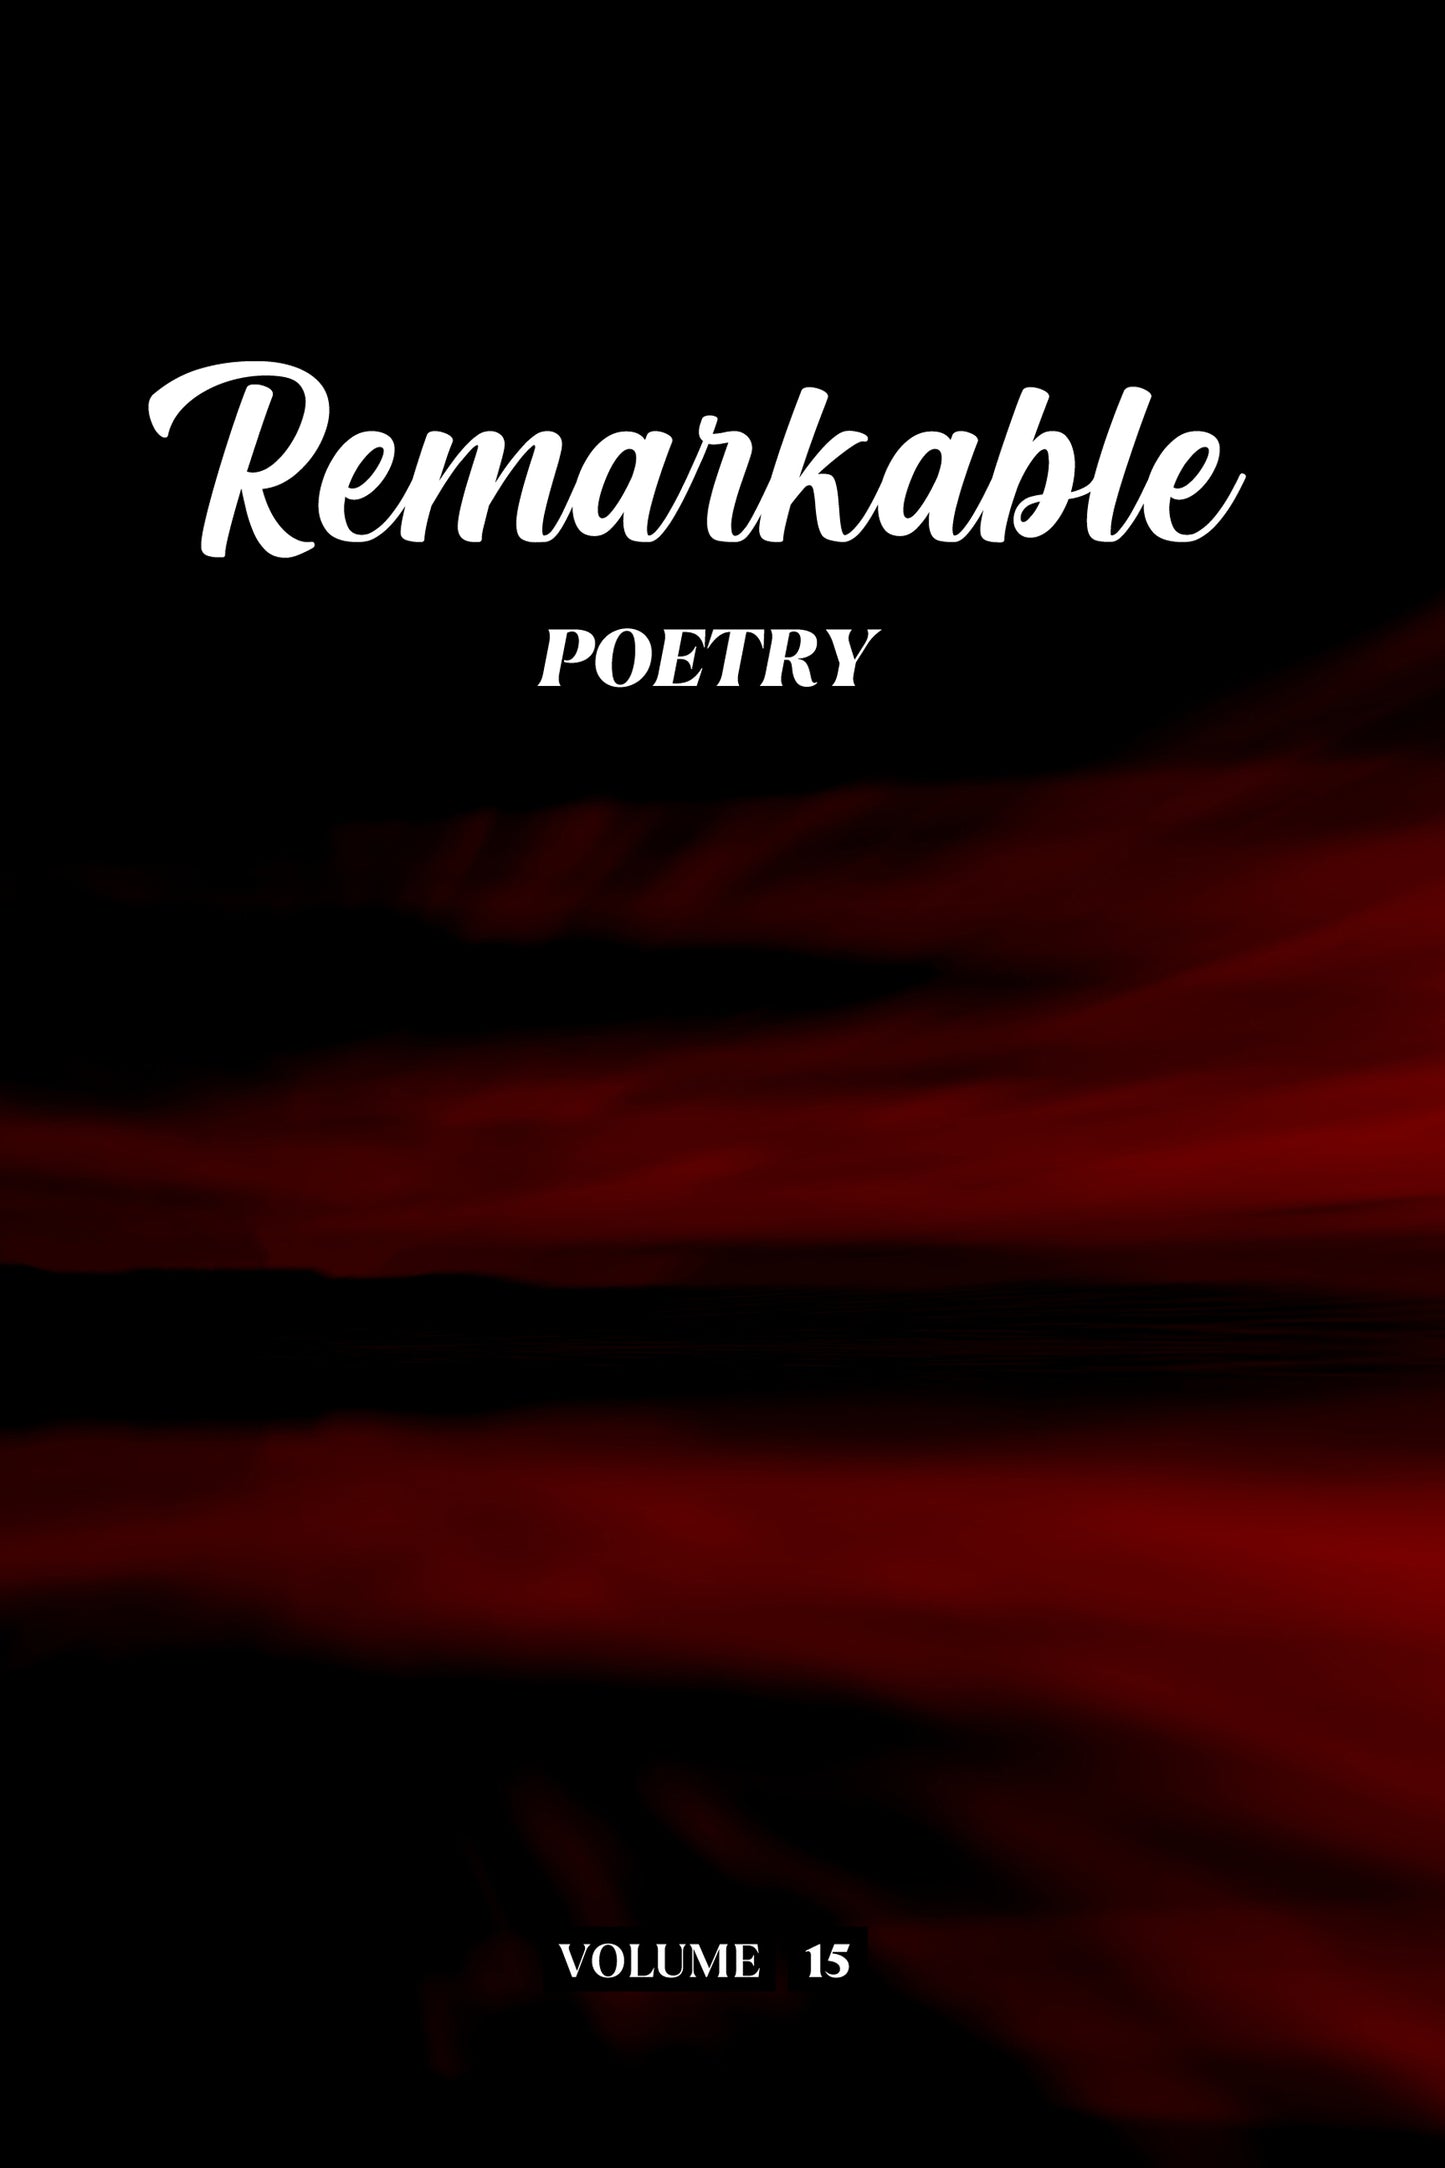 Remarkable Poetry (Volume 15) - Physical Book